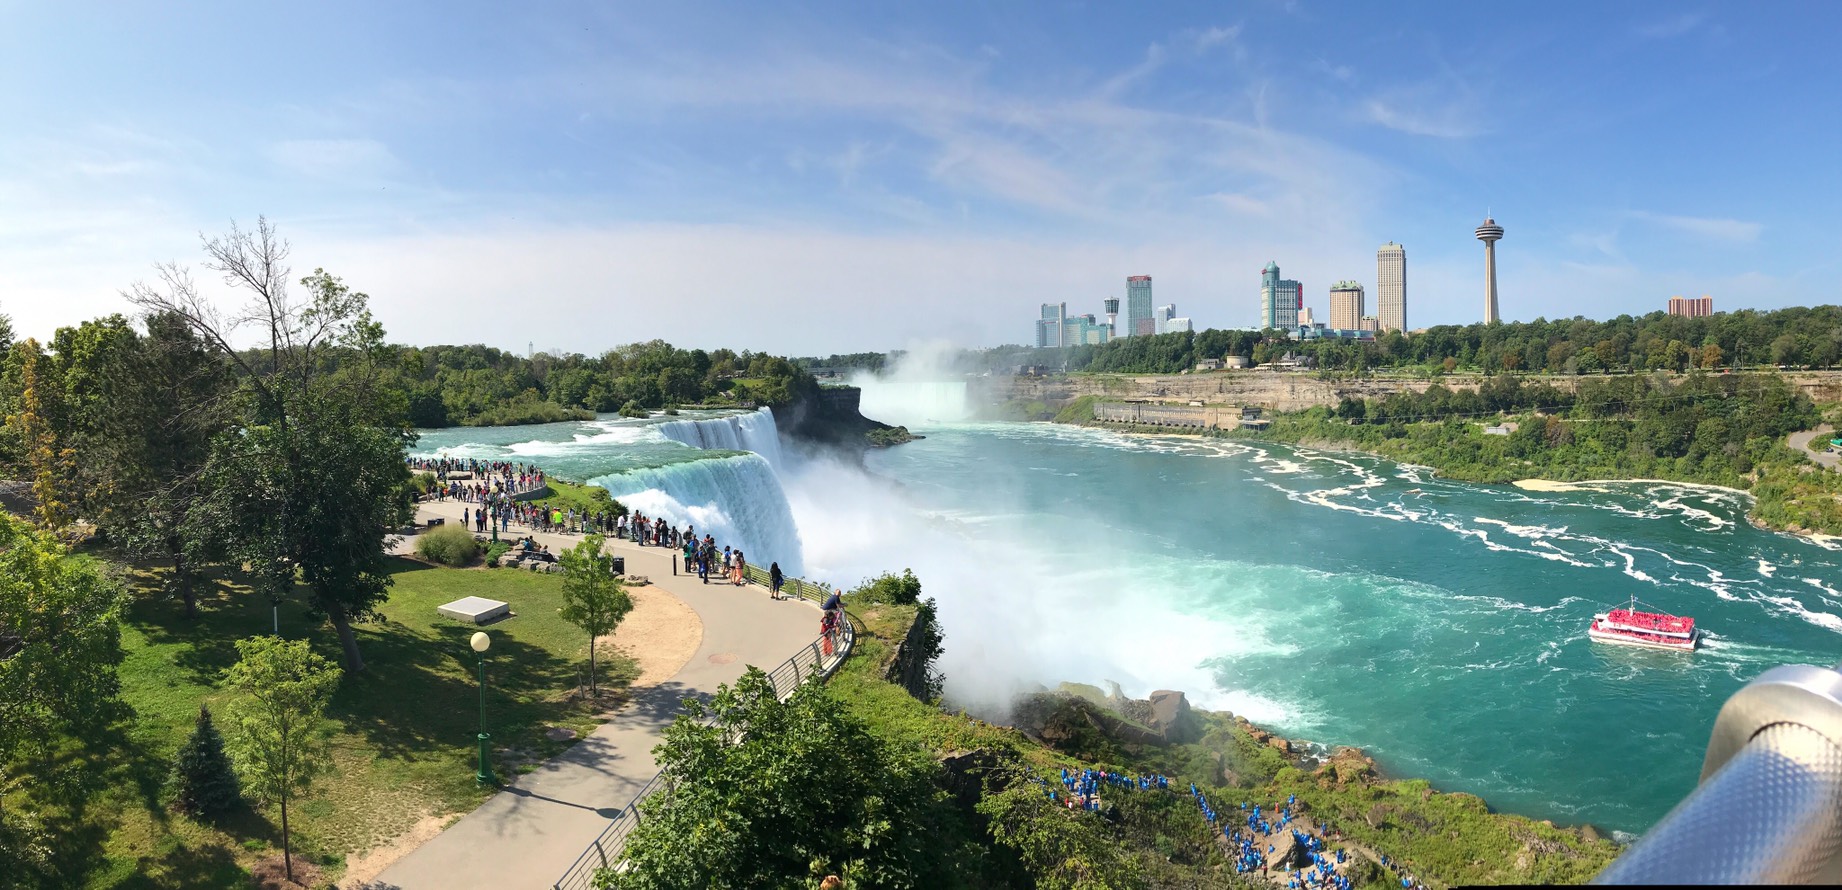 Photo showing the overview of the border between the USA and Canada with the waterfalls and tourists all around.